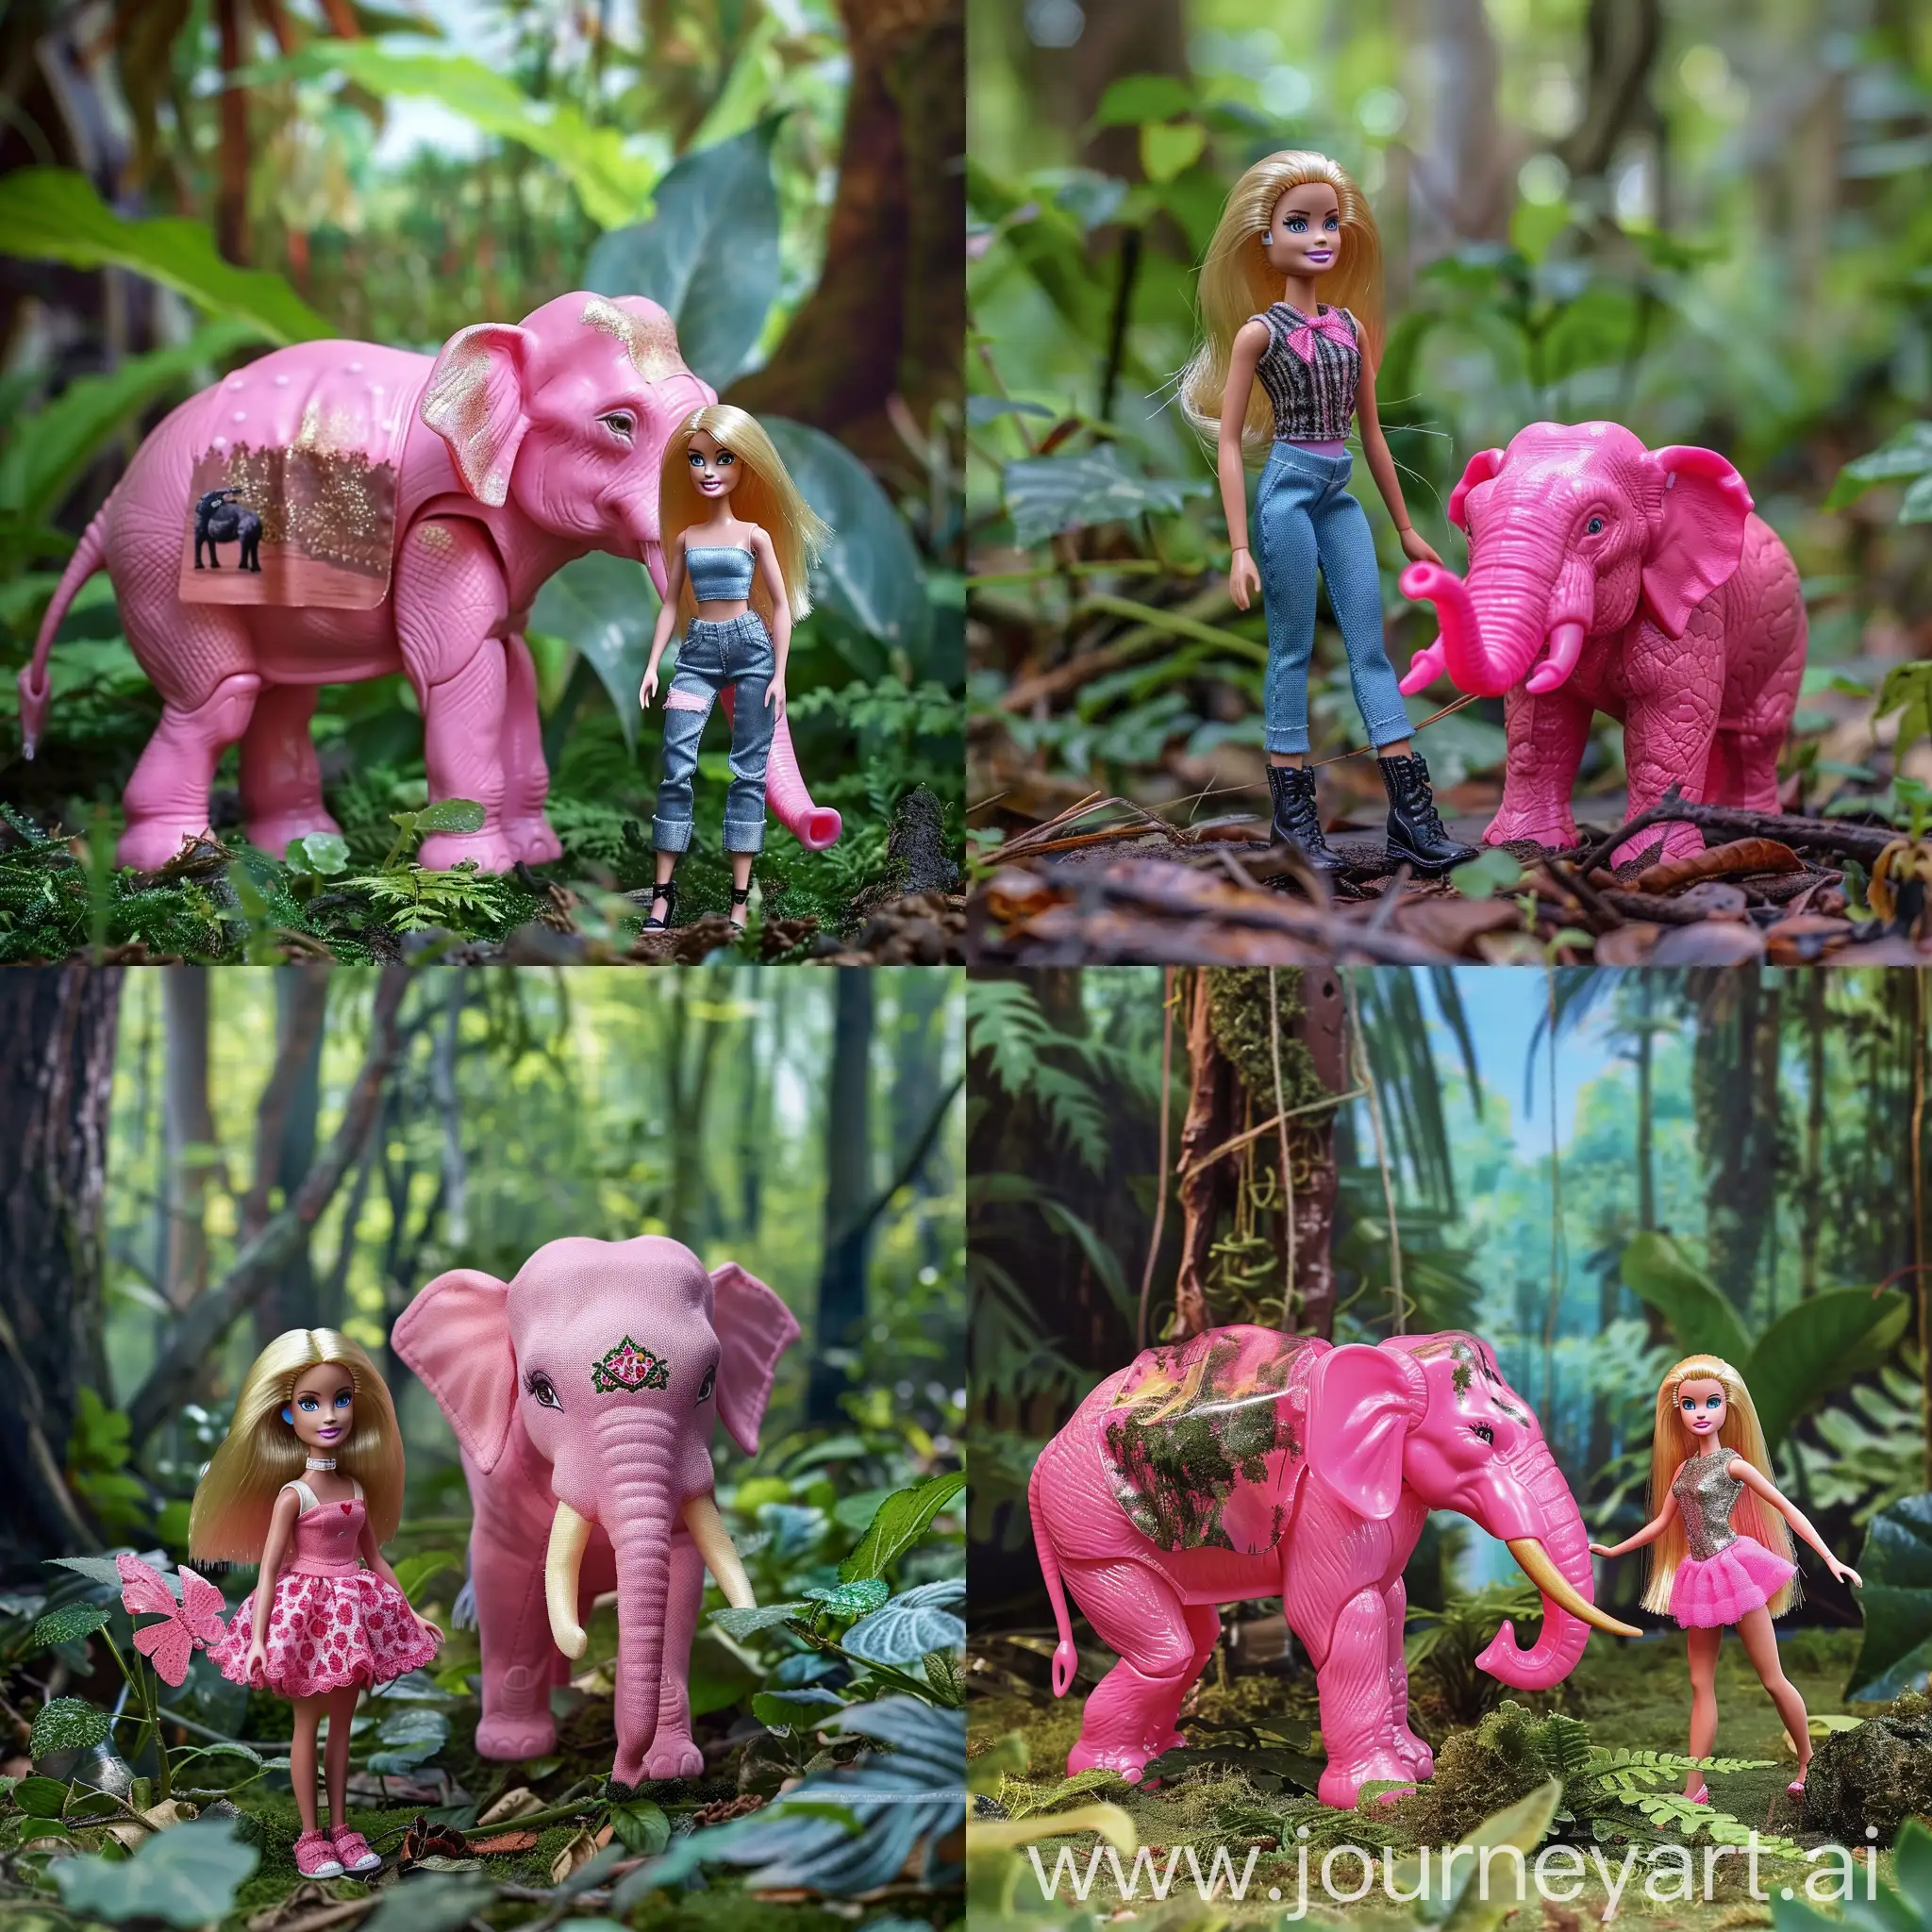 Pink-Elephant-and-Barbie-Doll-Enjoying-Forest-Adventure